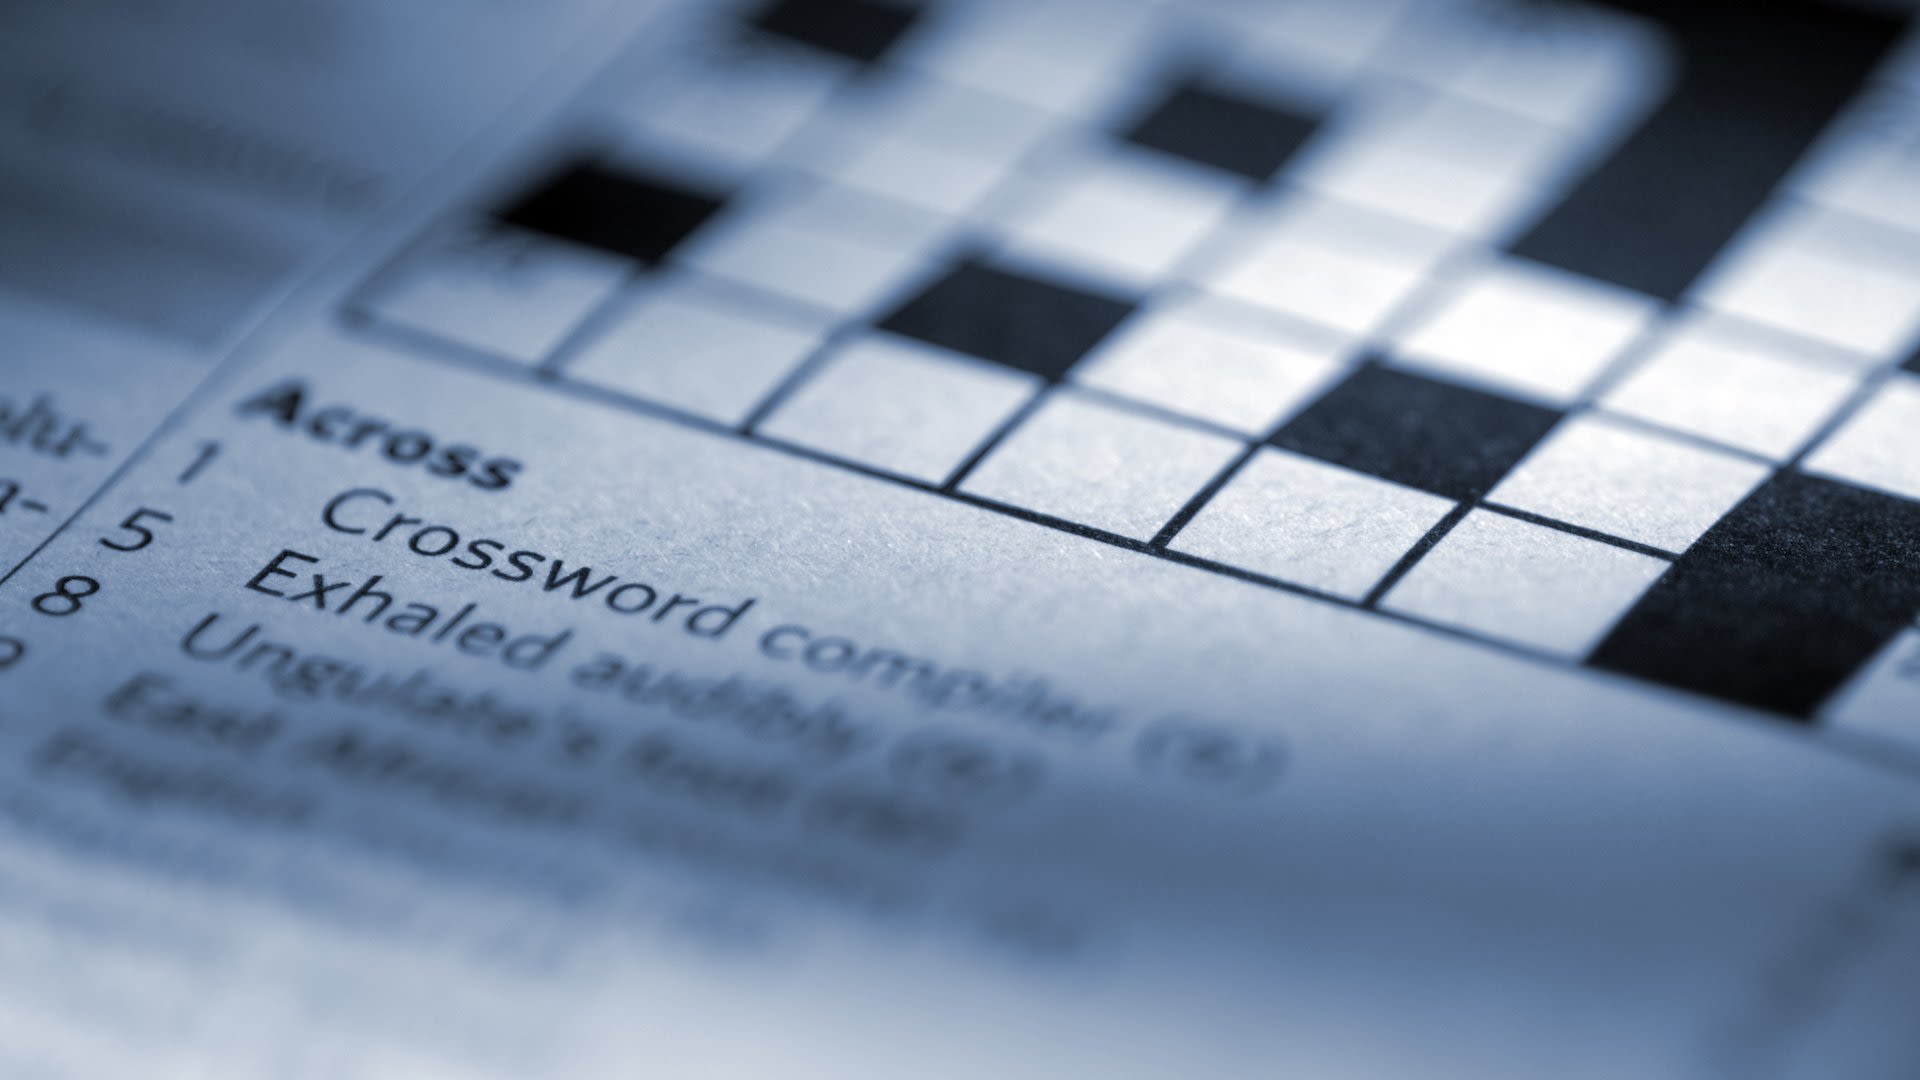 NYT's The Mini crossword answers for July 17